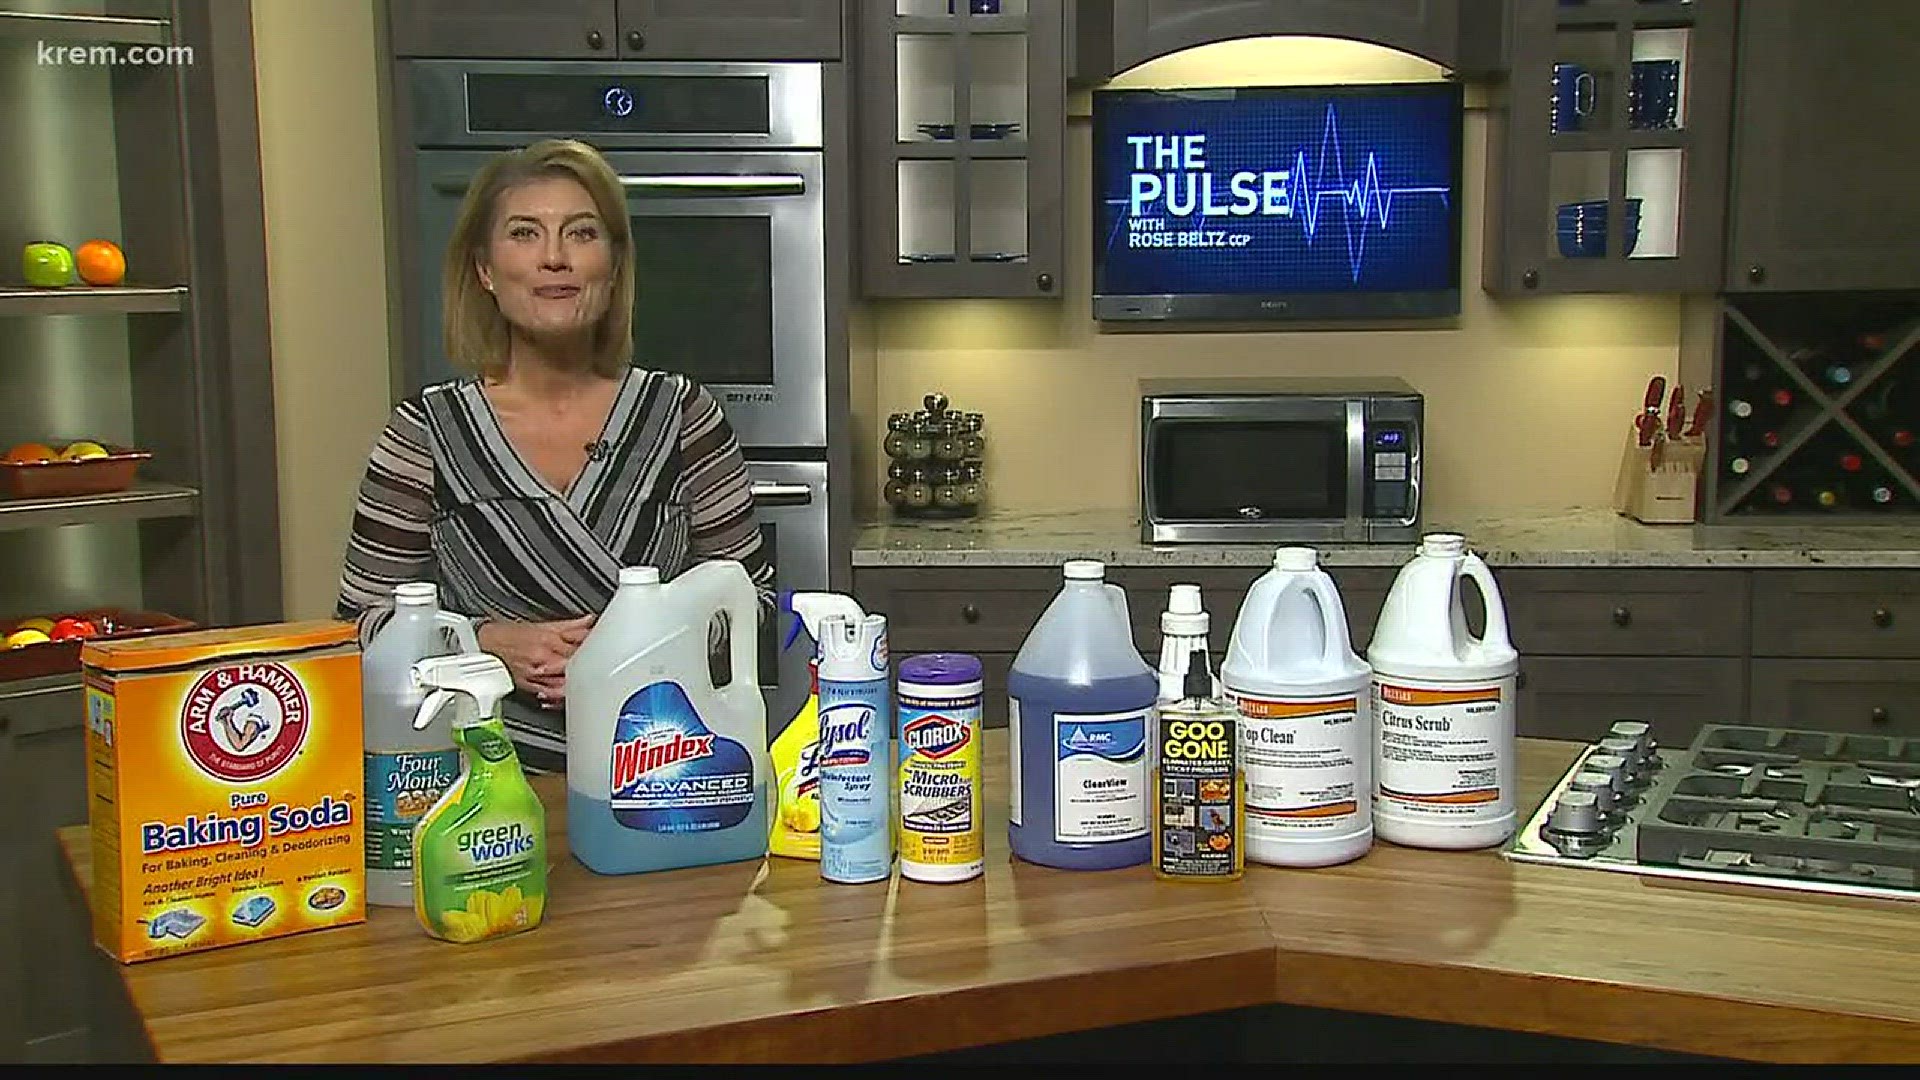 Cleaning products could cause long-term health issues